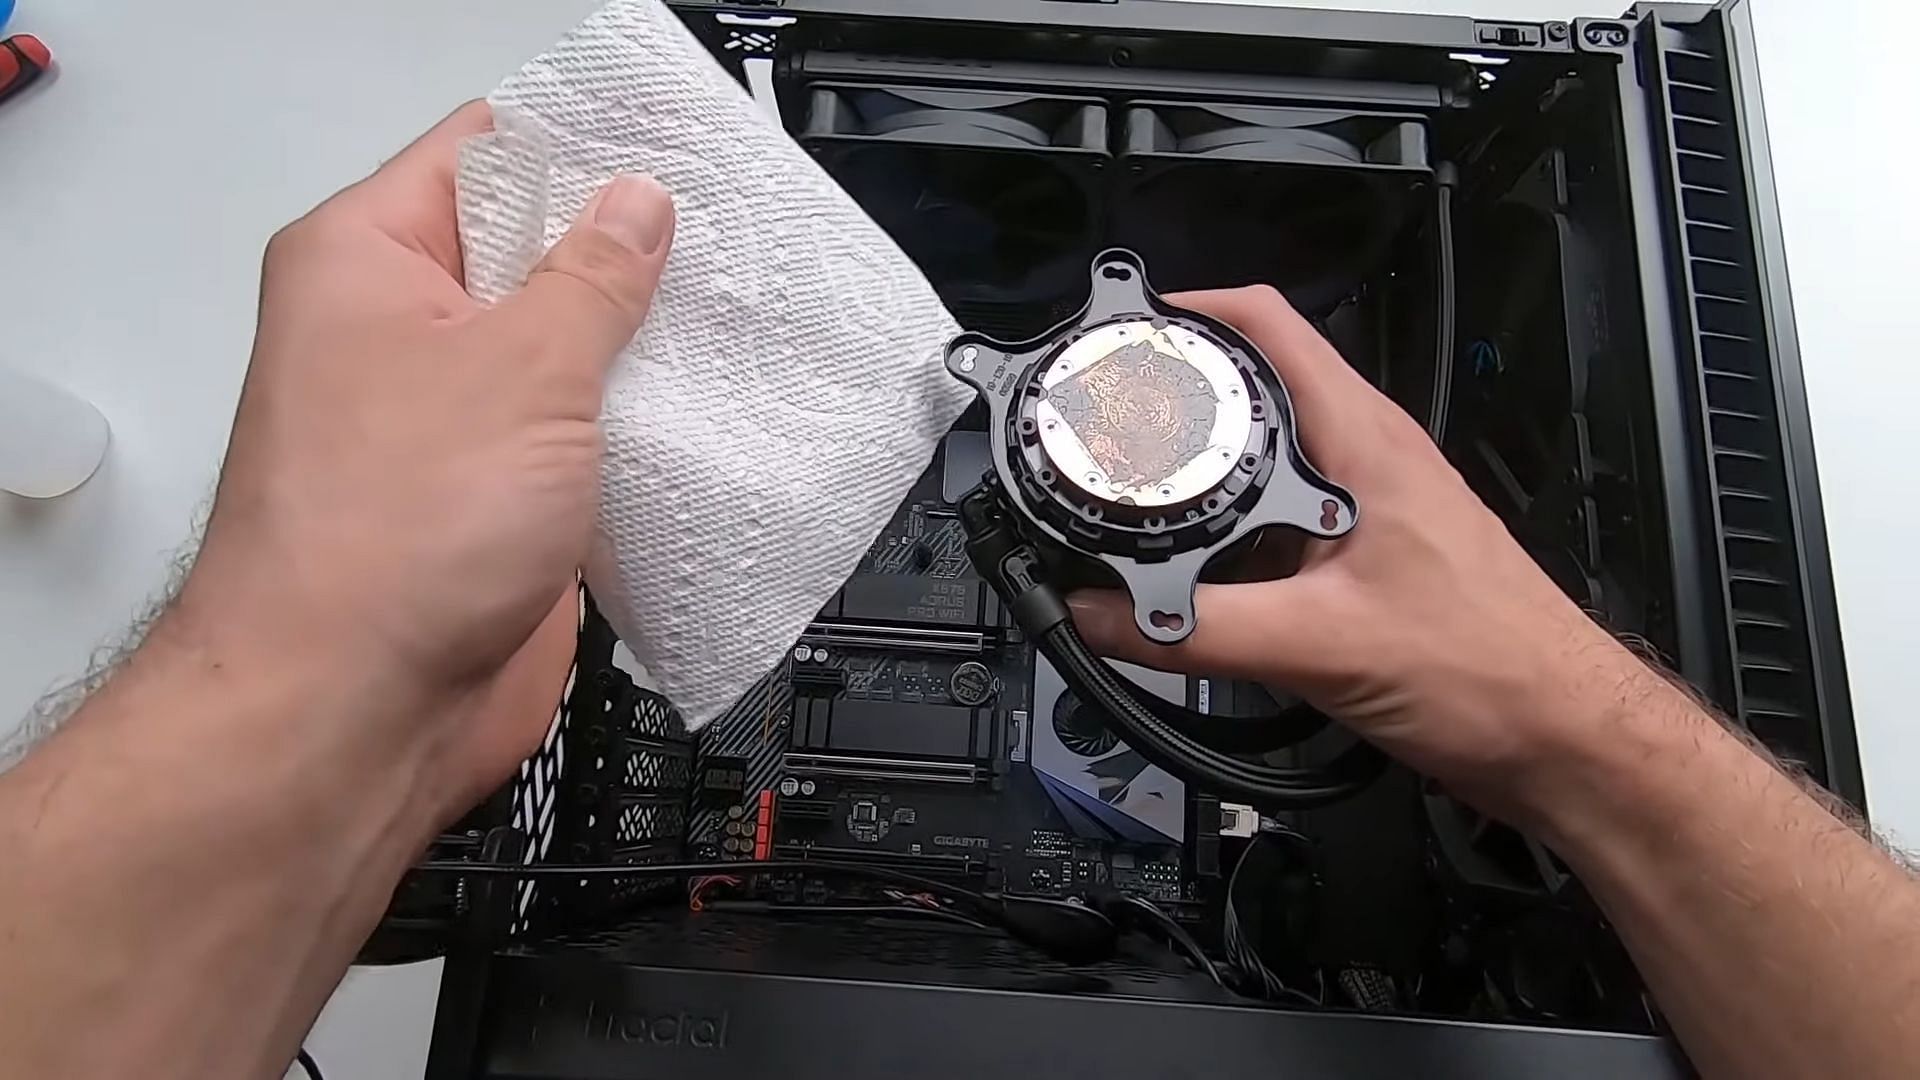 Cleaning a CPU cooler